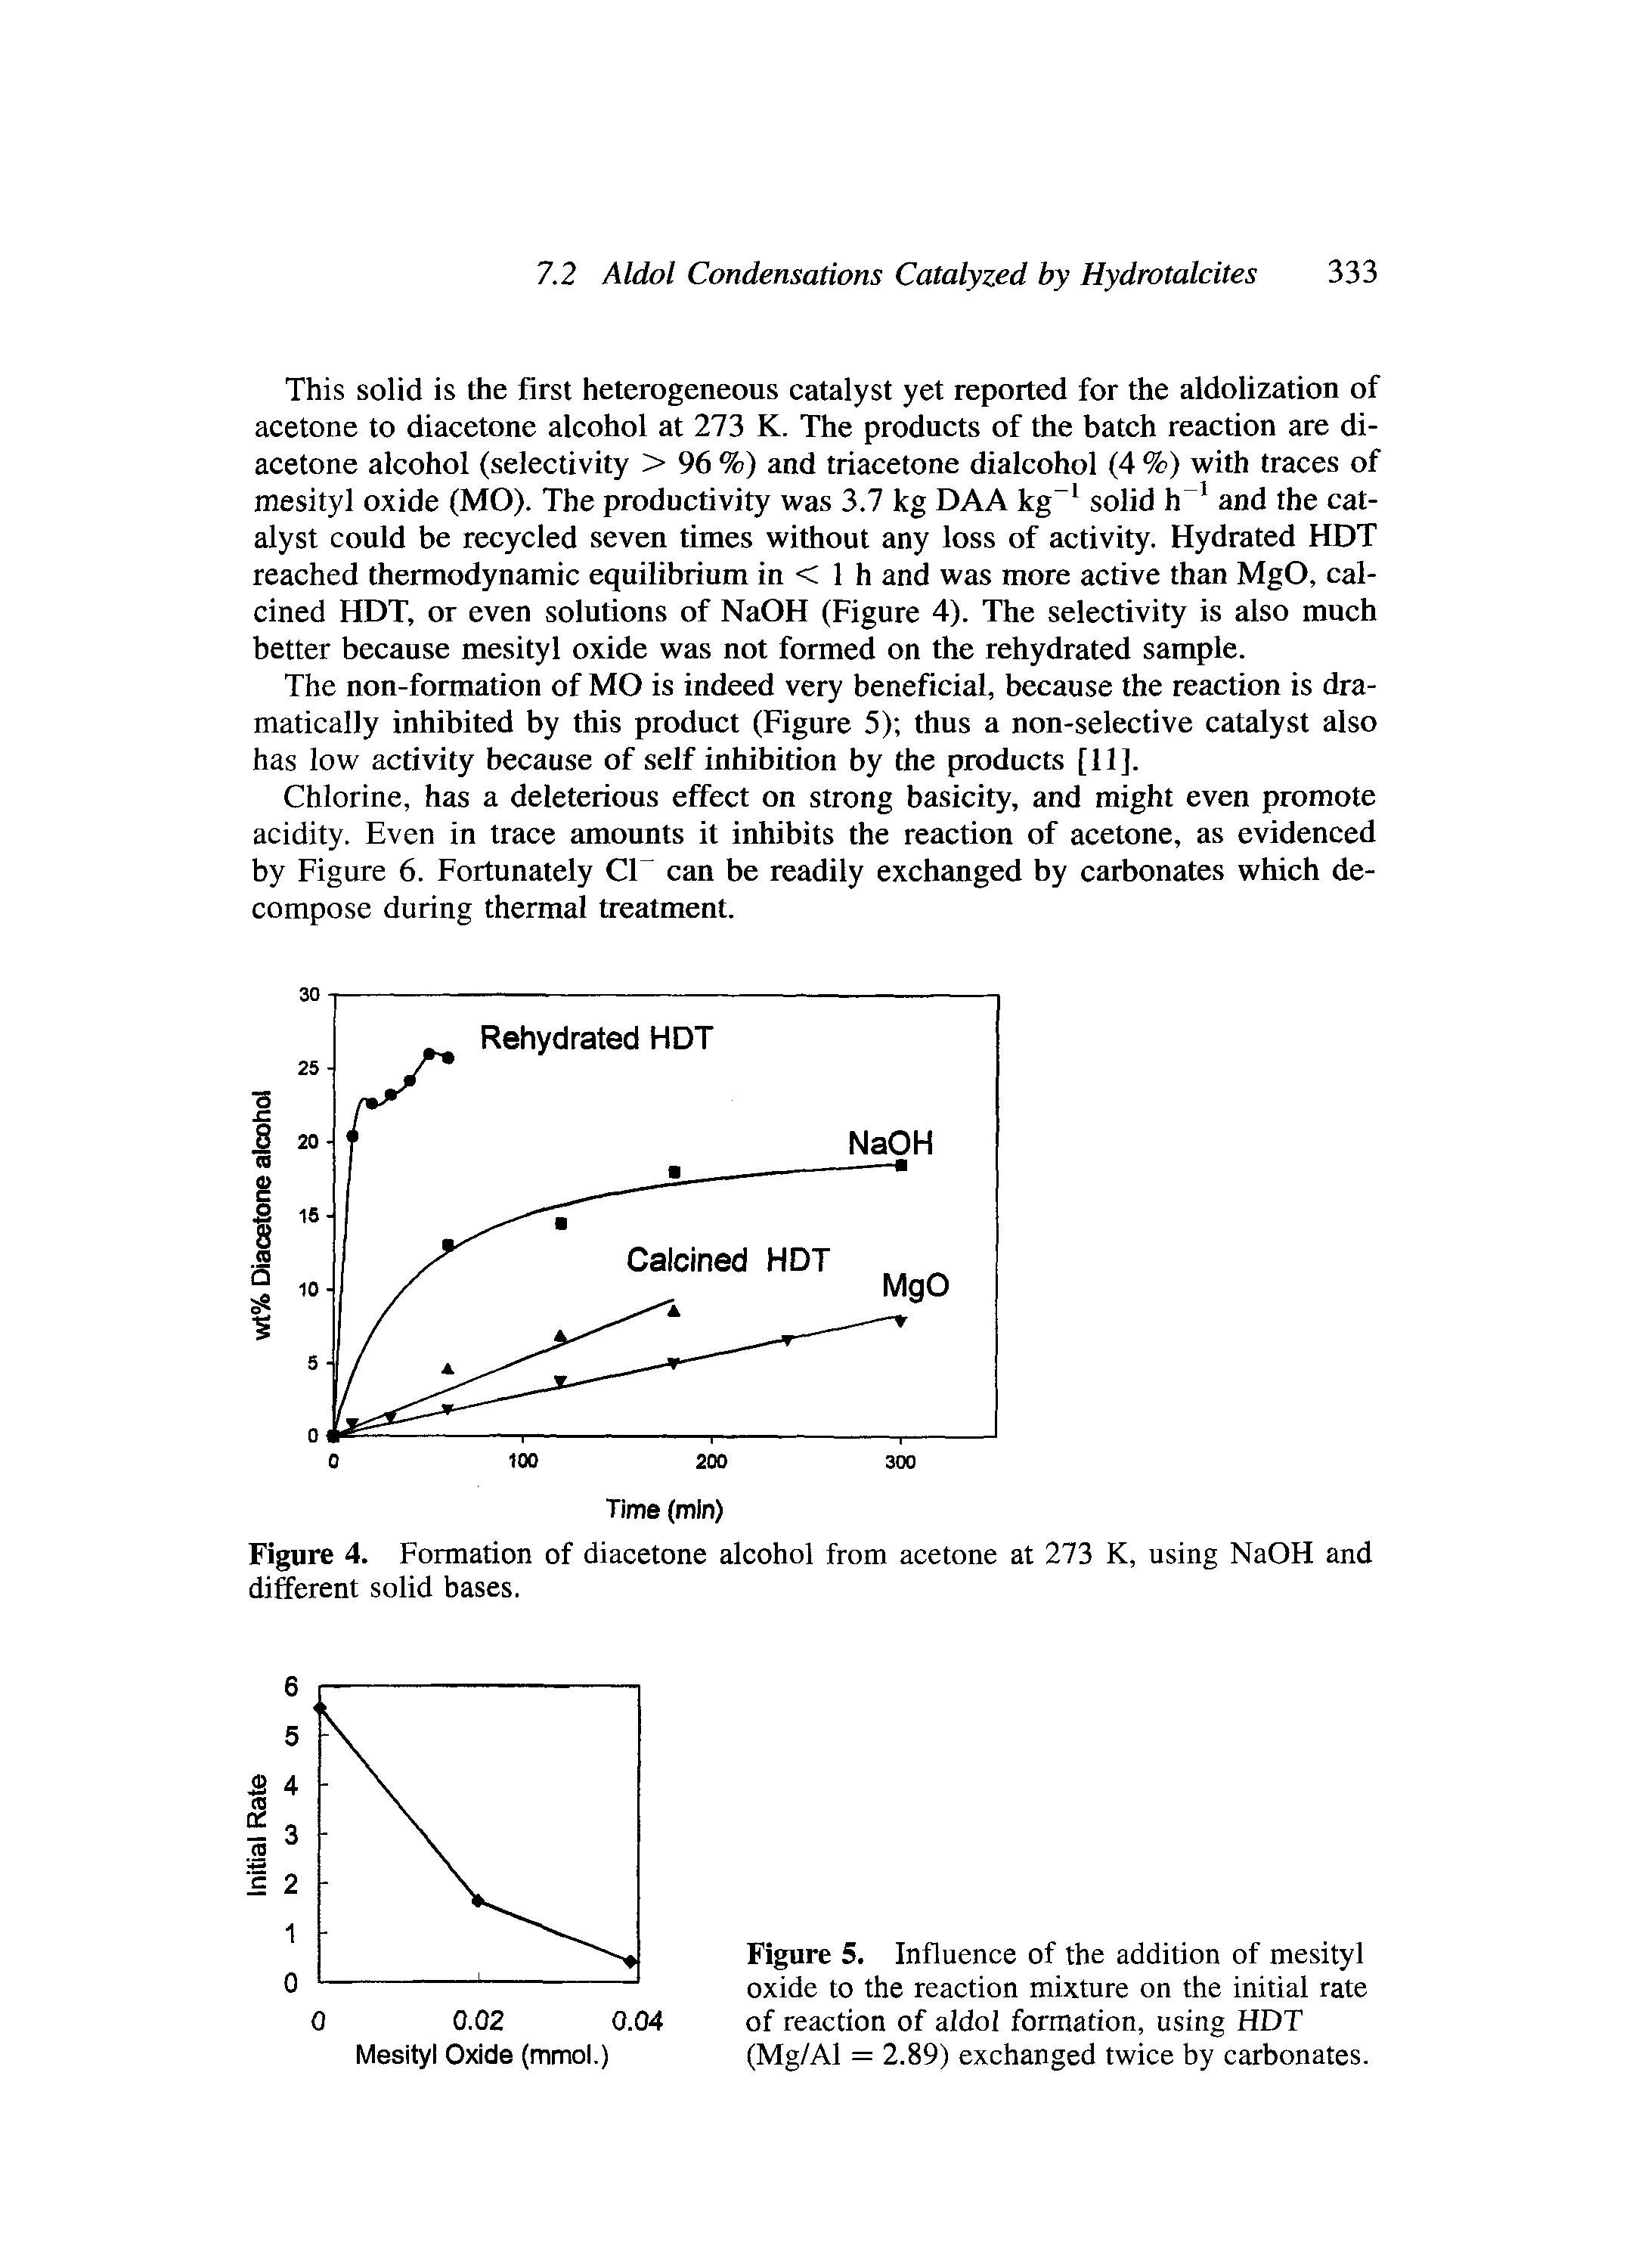 Figure 5. Influence of the addition of mesityl oxide to the reaction mixture on the initial rate of reaction of aldol formation, using HDT (Mg/Al = 2.89) exchanged twice by carbonates.